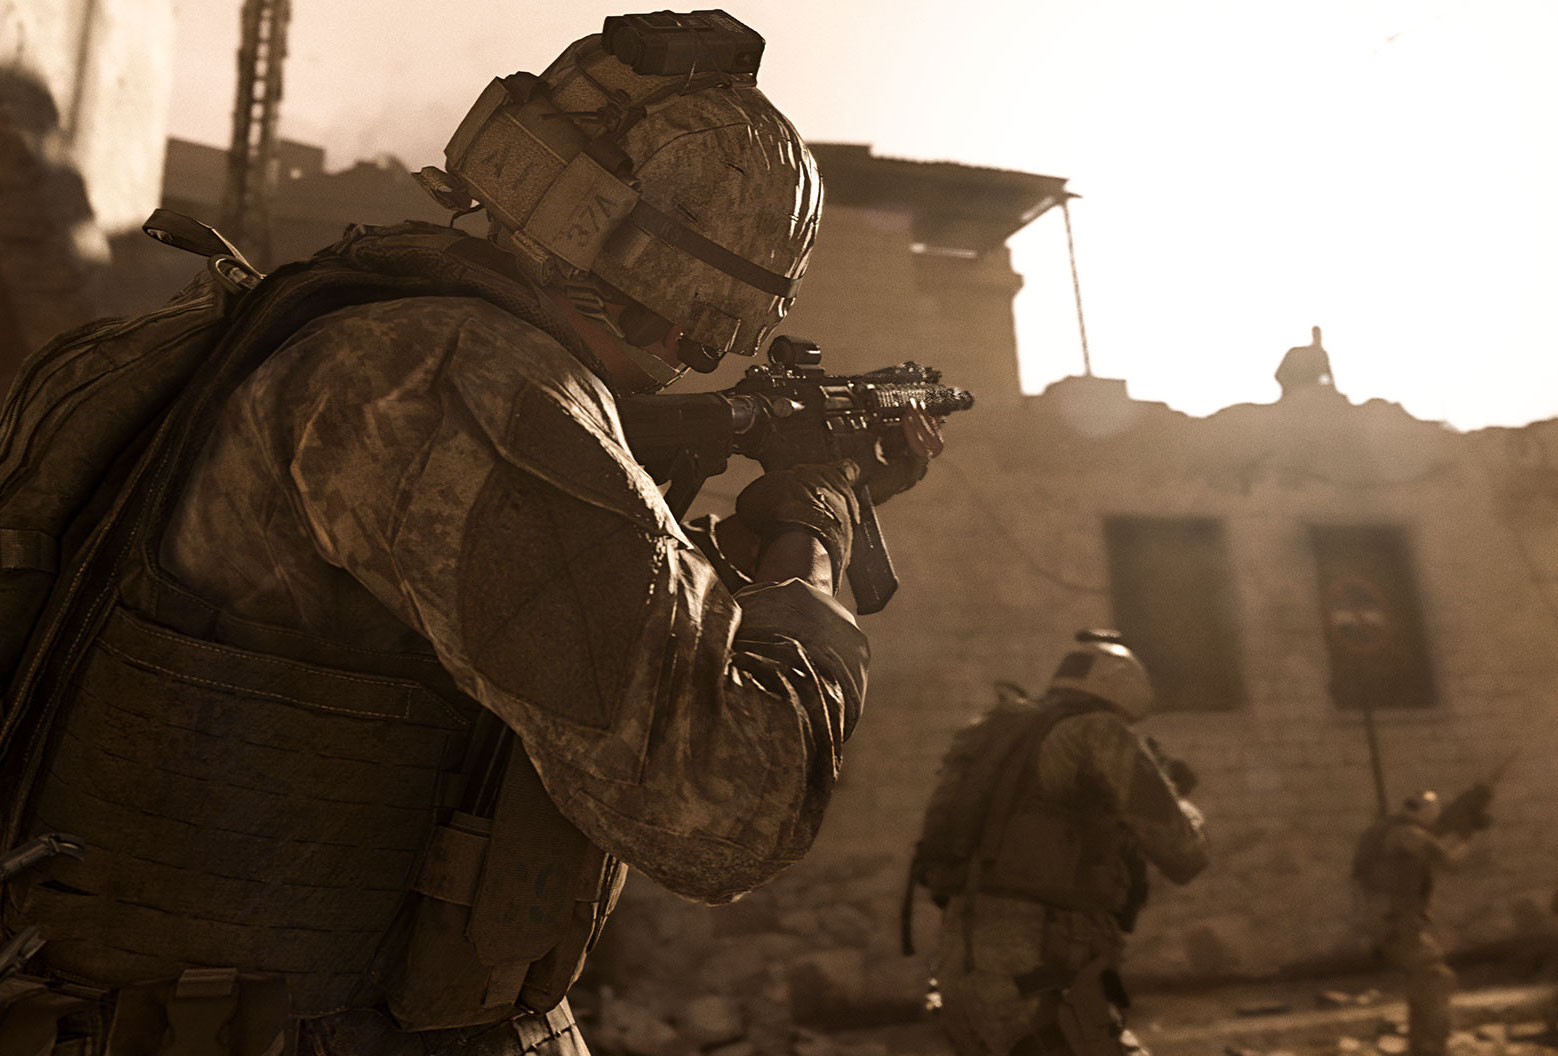 Angry Call of Duty Fans Are Review-Bombing the Wrong Modern Warfare 3